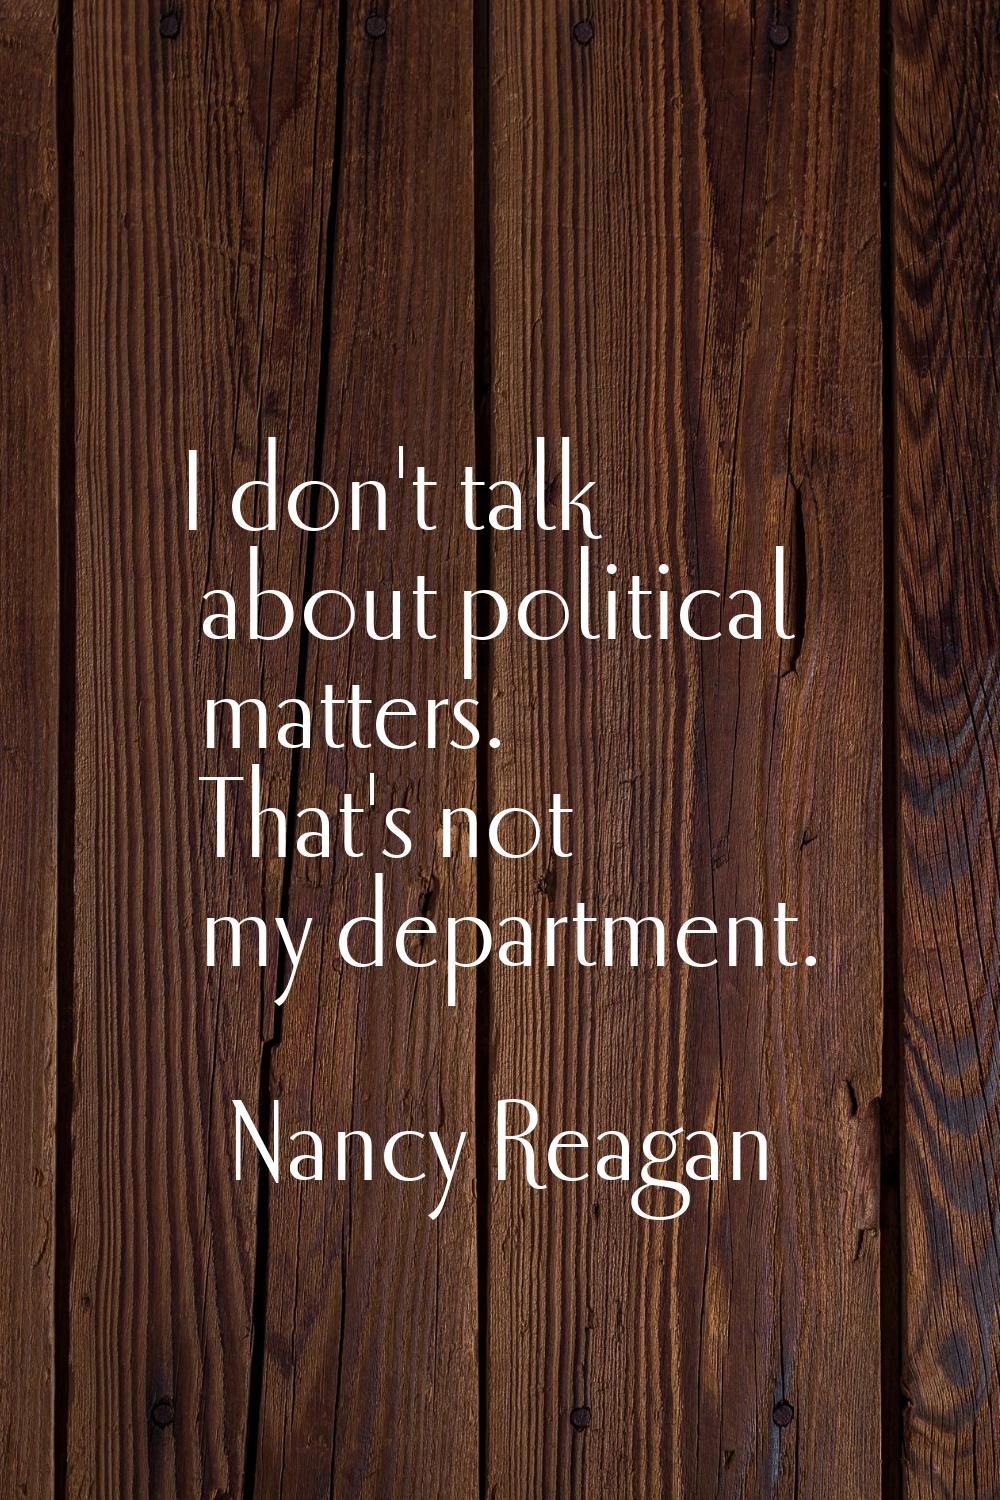 I don't talk about political matters. That's not my department.